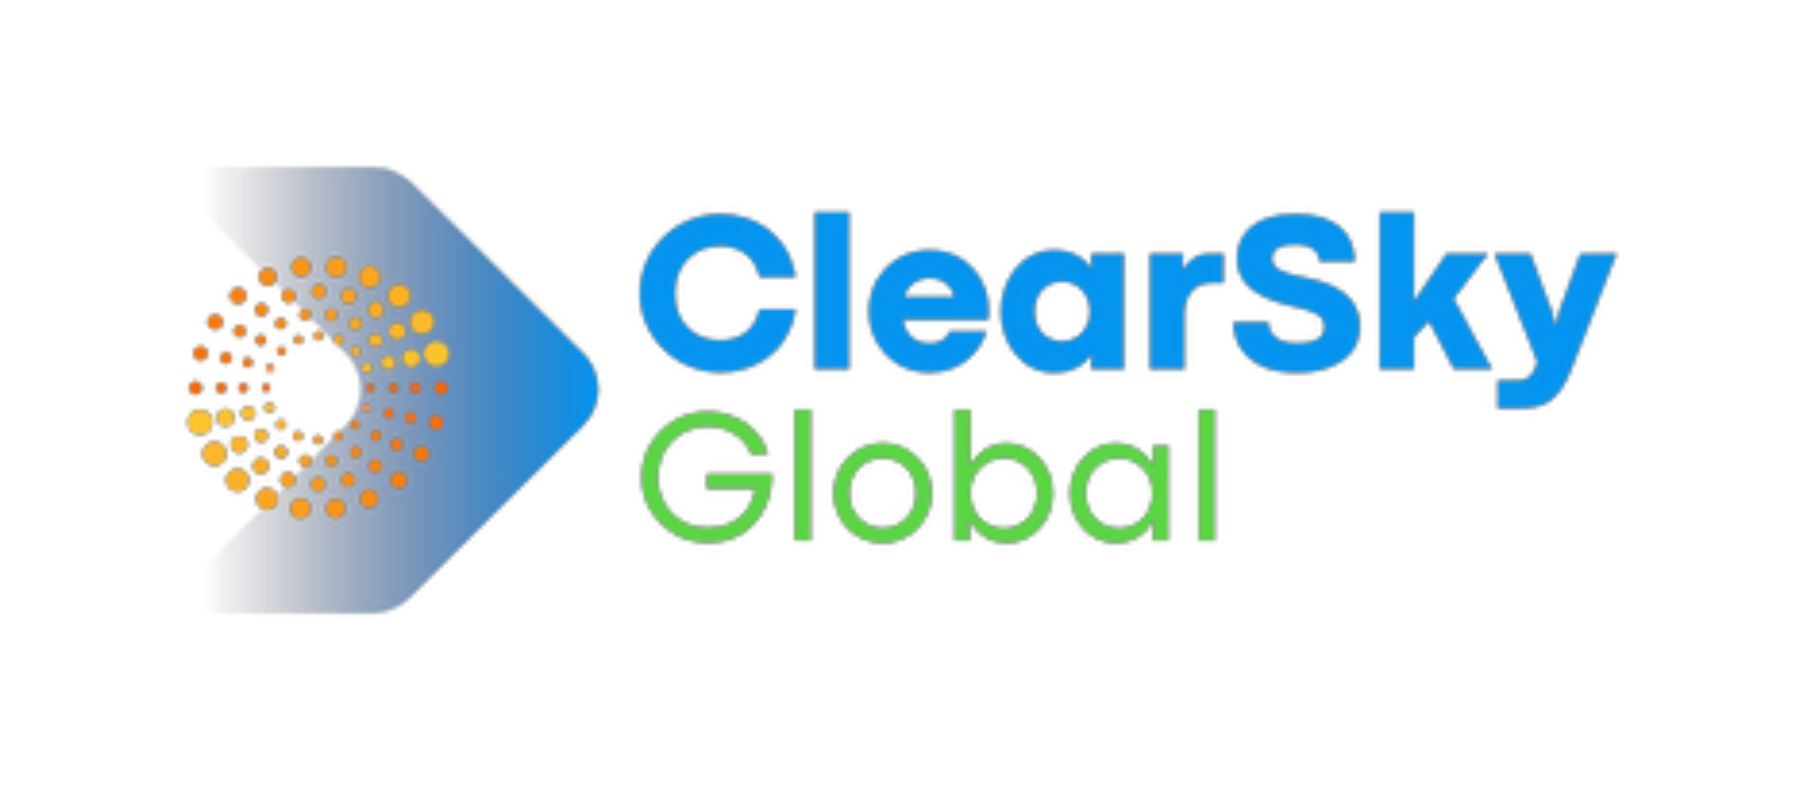 ClearSky Global raises $168m to deploy low carbon alternative fuels across Canada and North America